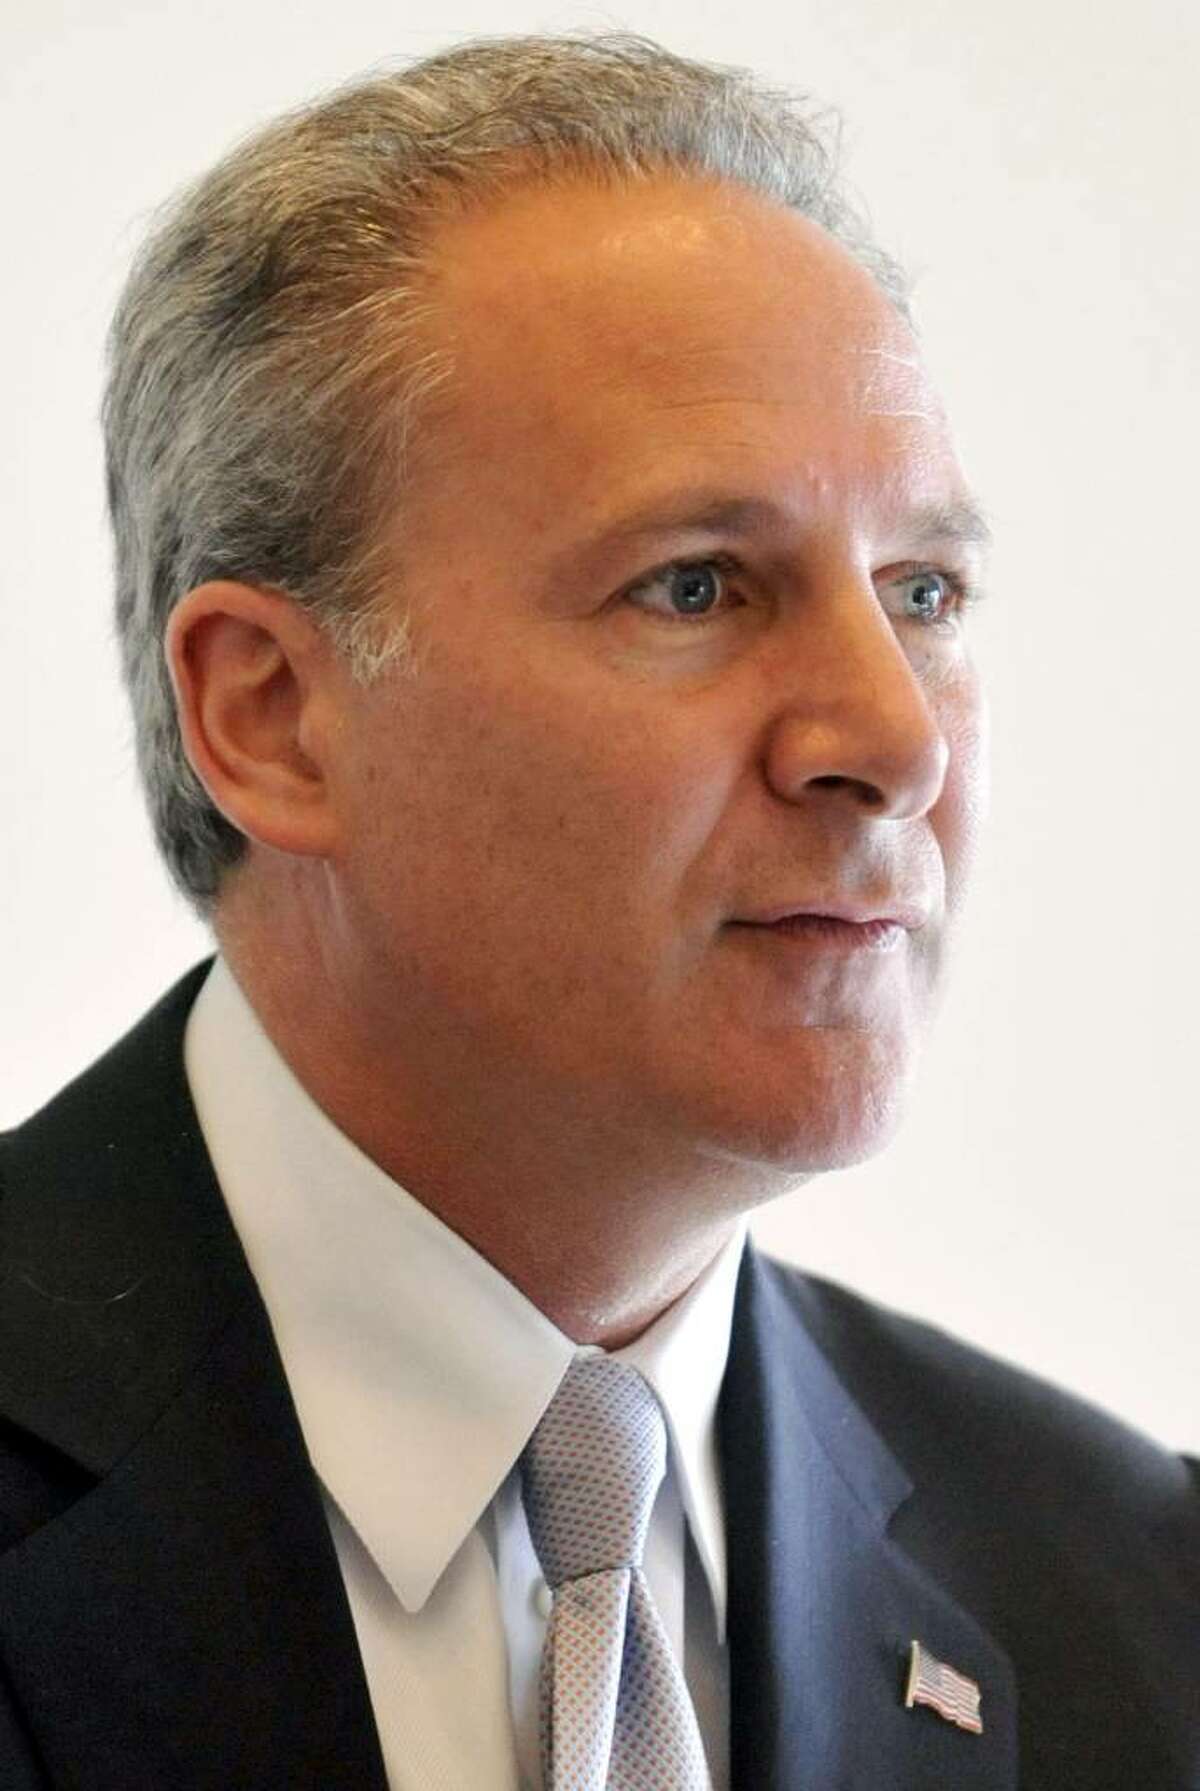 Fate of Schiff's Senate candidacy in hands of local registrars